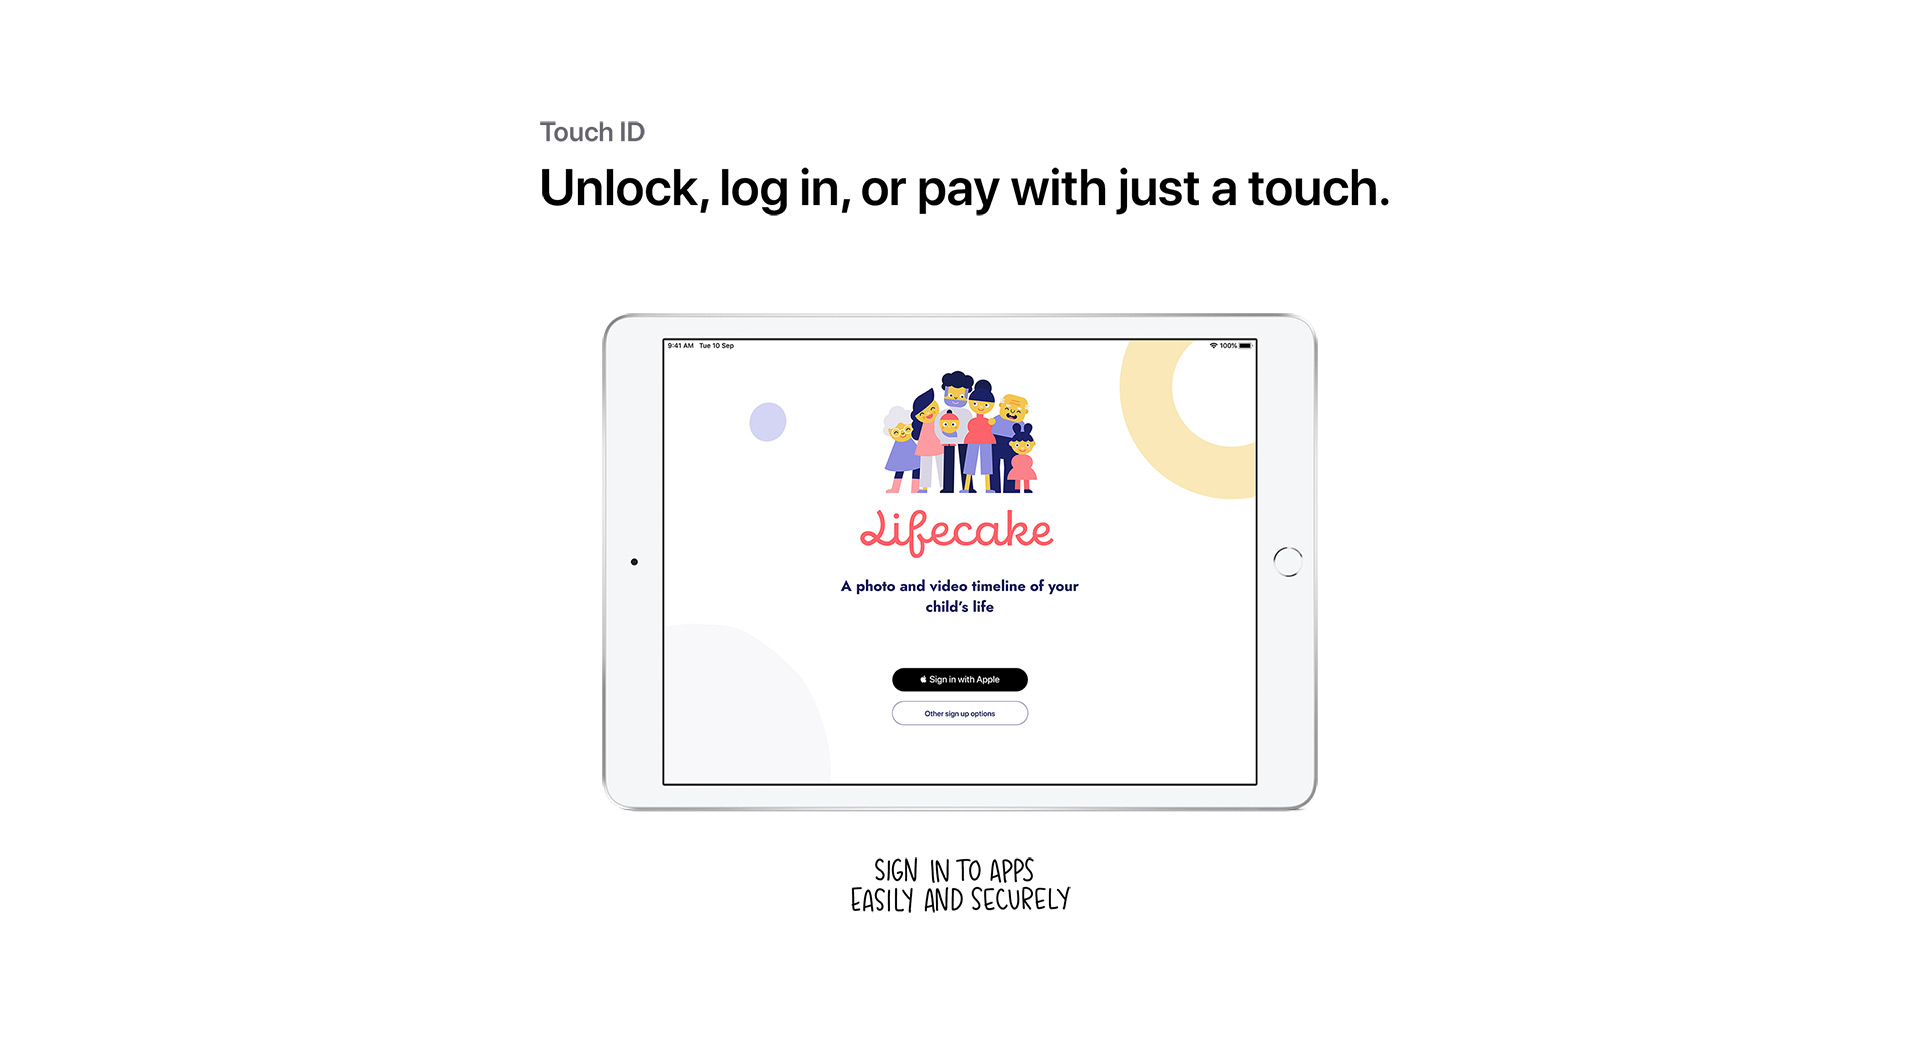 Unlock, log in, or pay with just a touch.